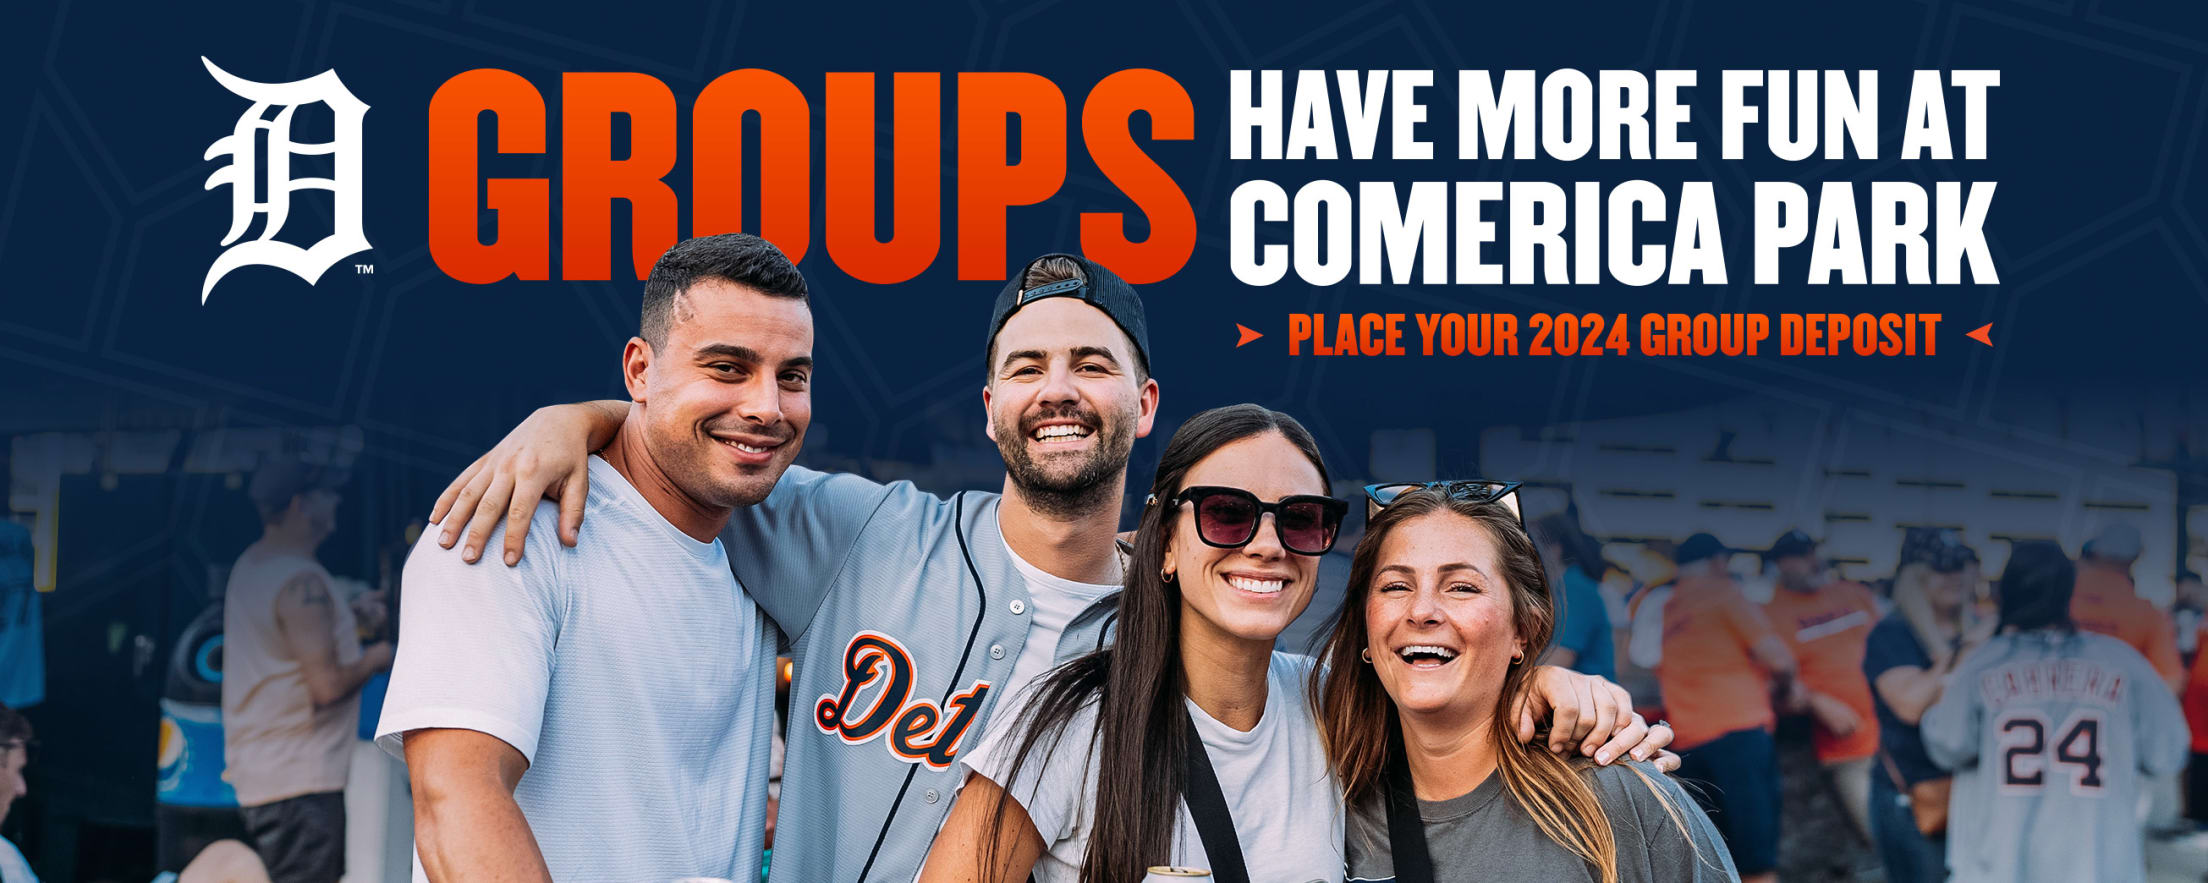 A guide to new Tigers apparel and merchandise at Comerica Park